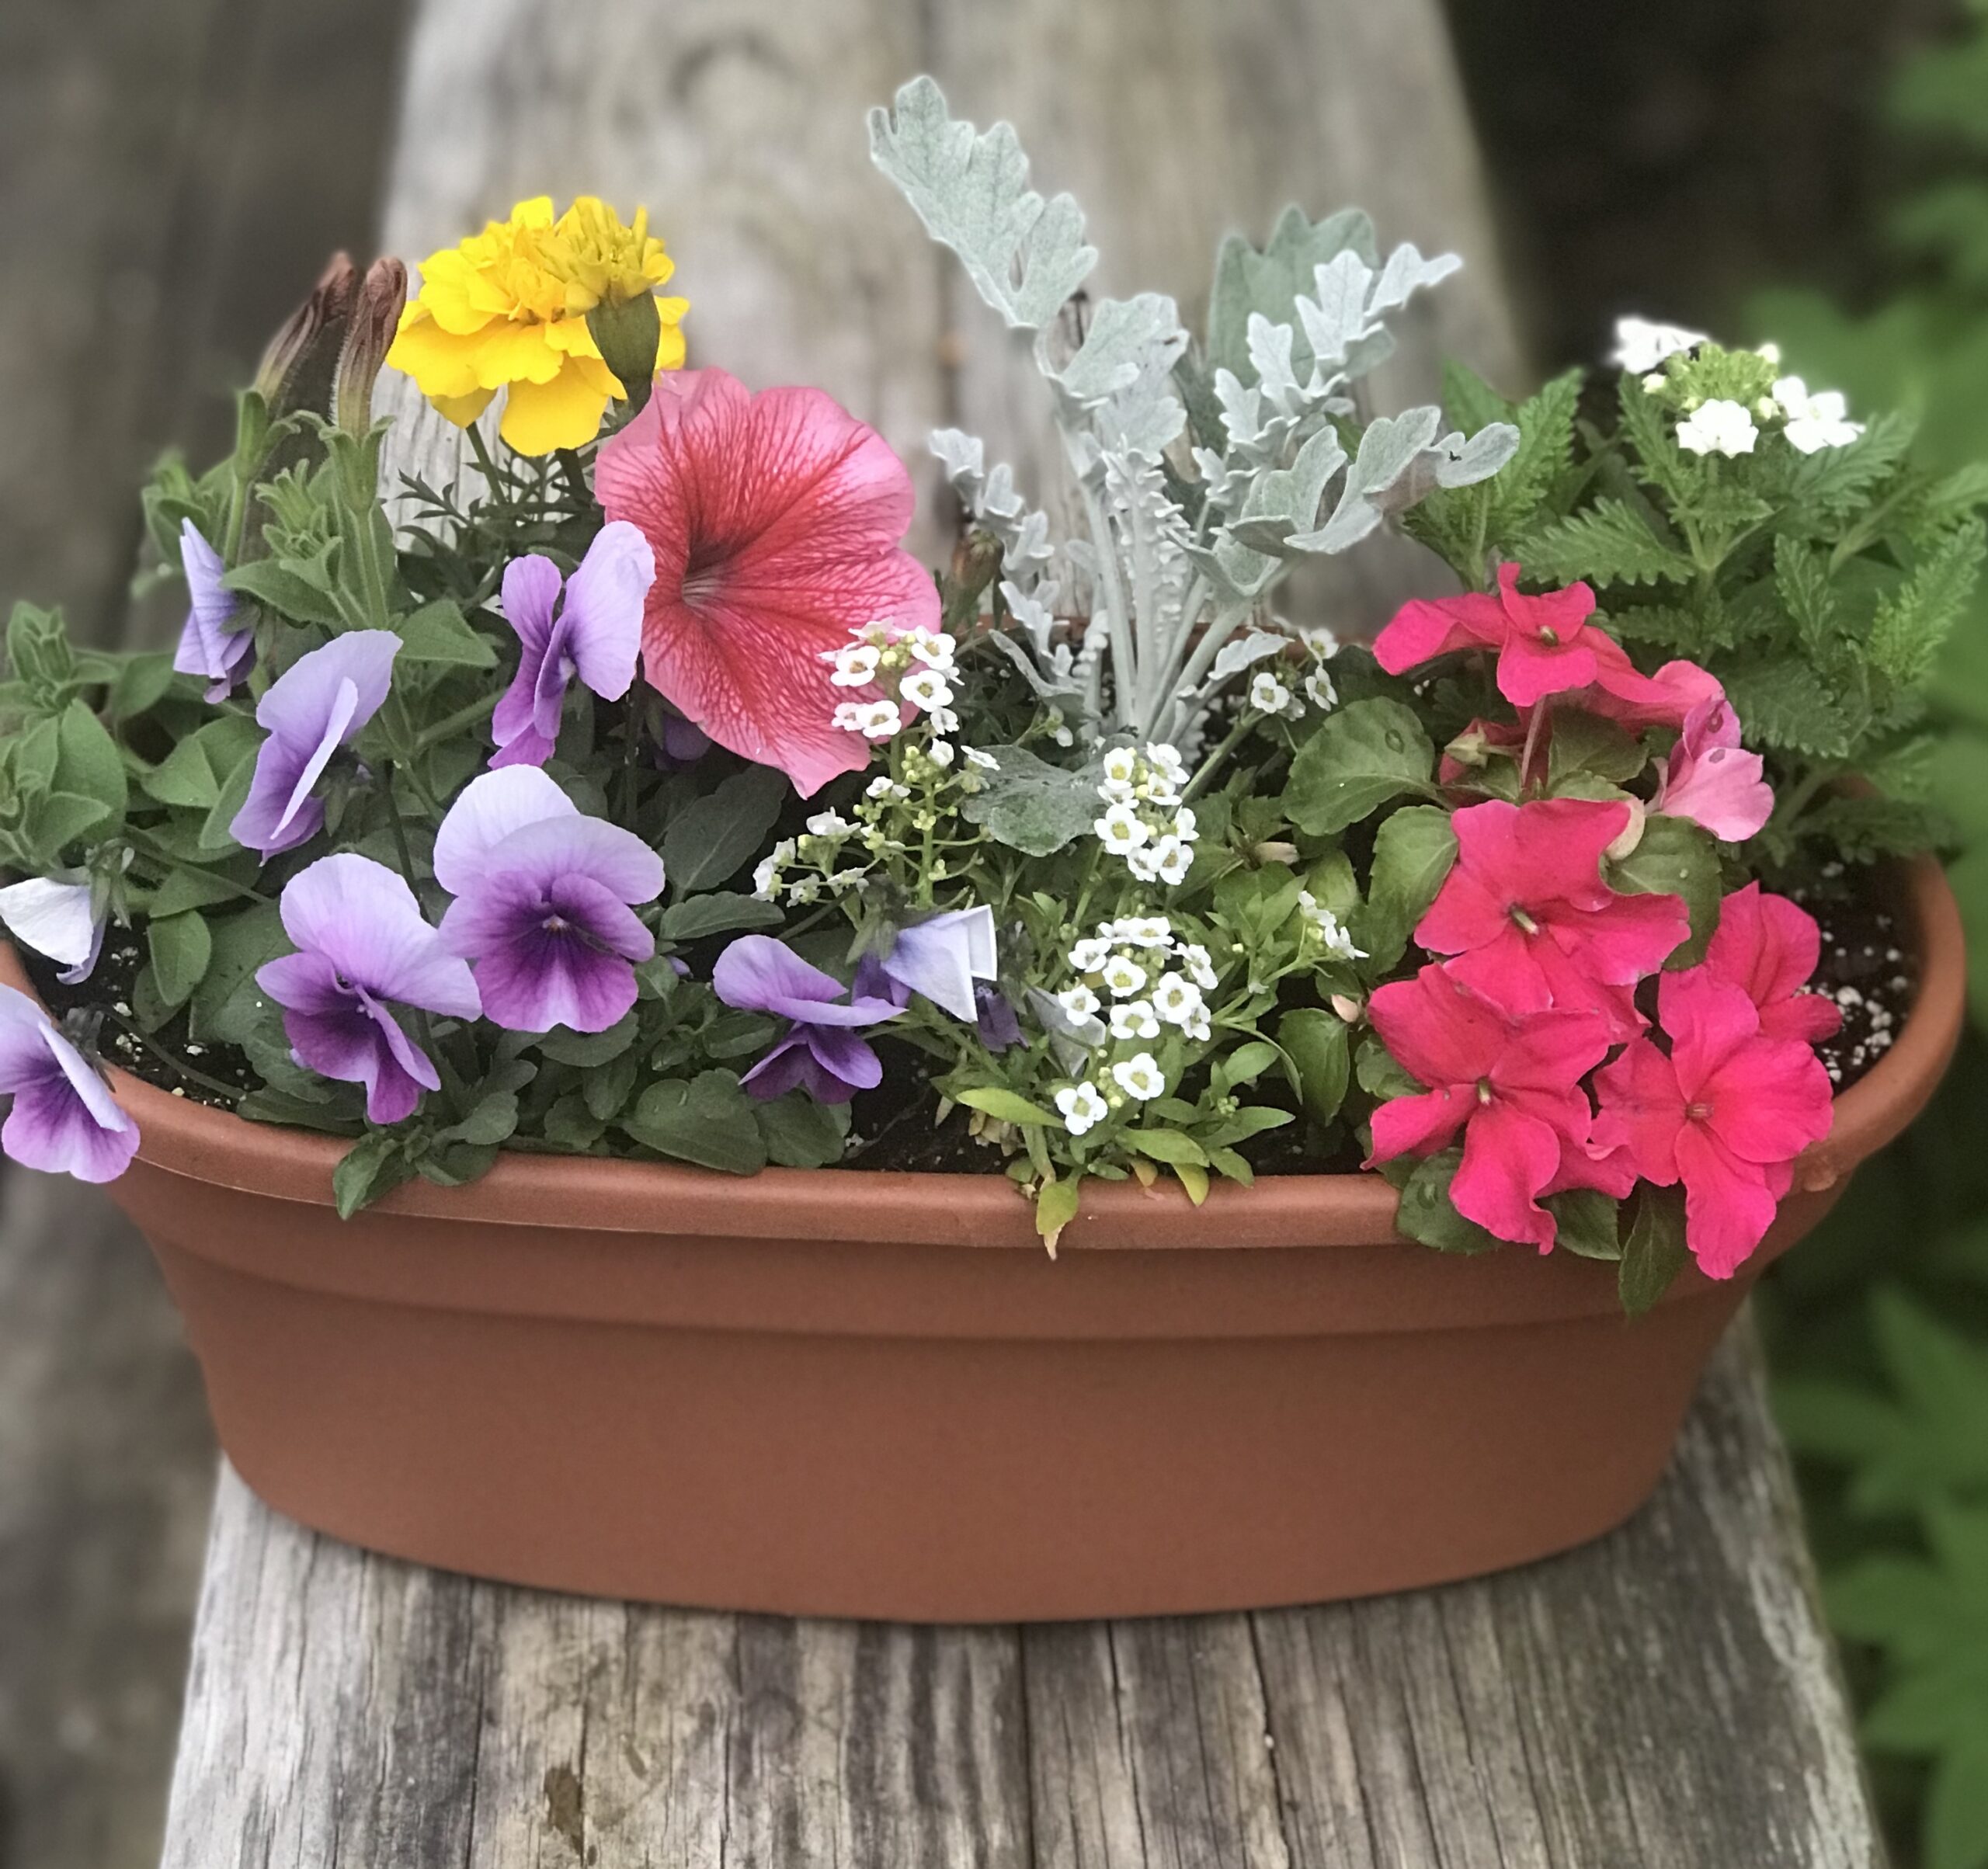 Oval container garden of summer annuals